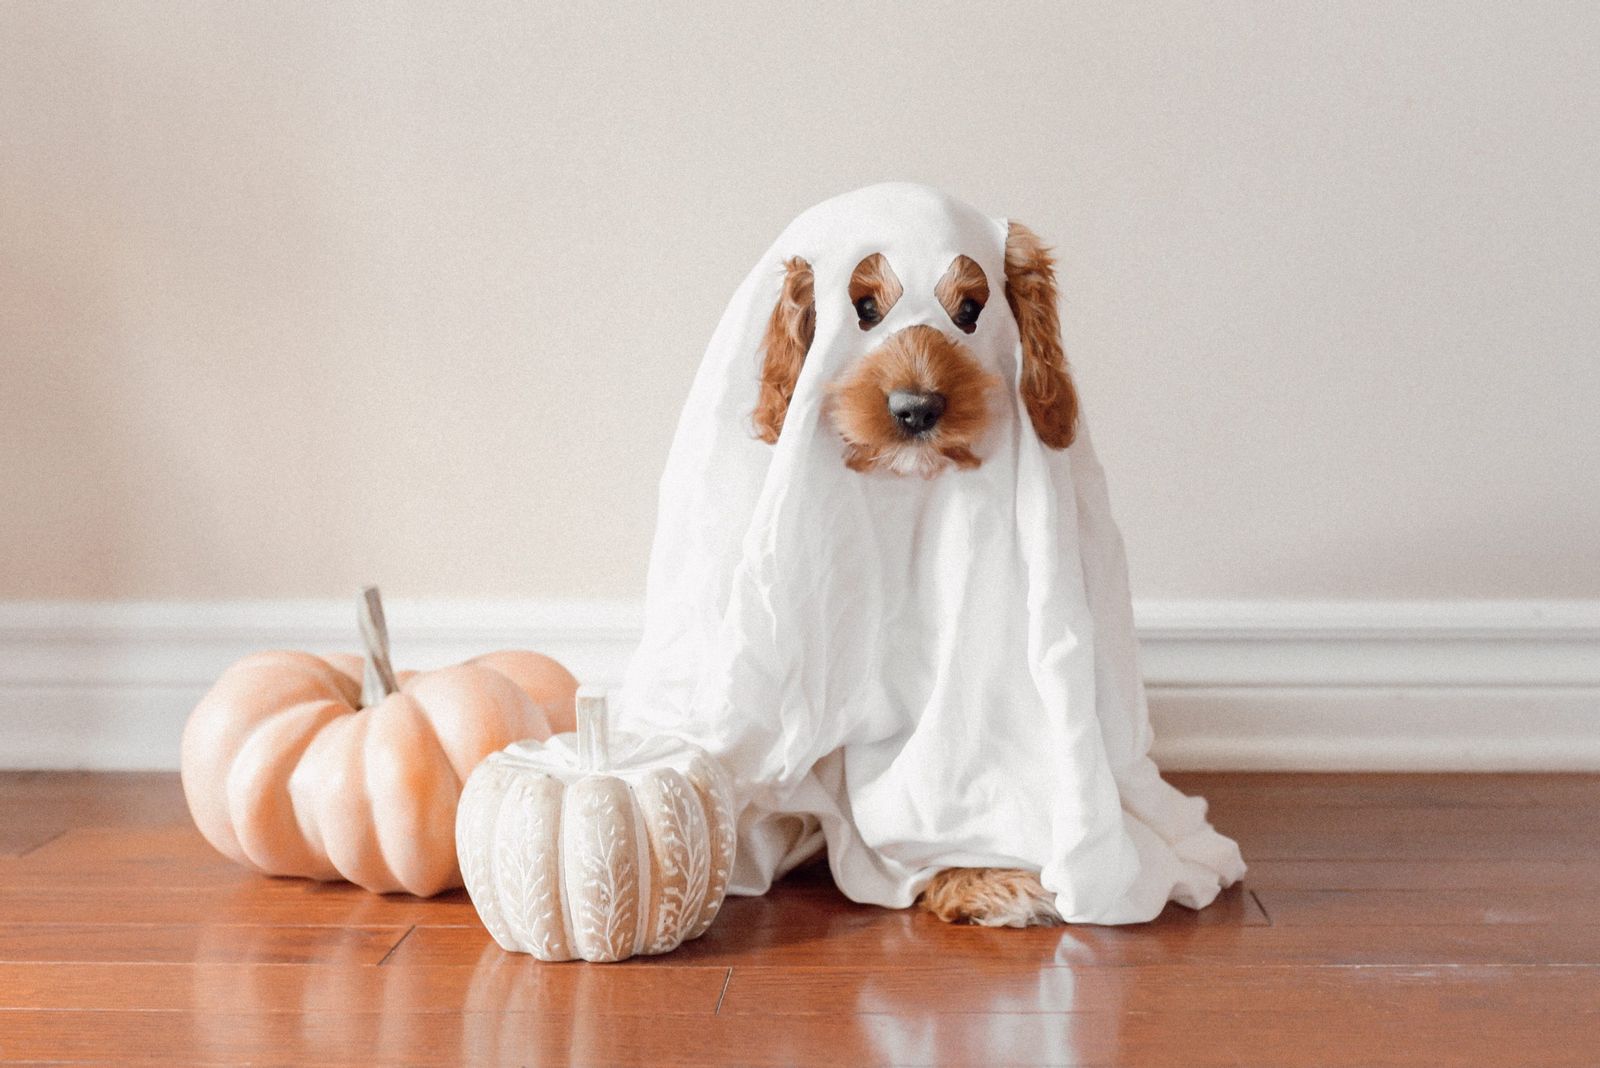 Top 5: DIY Tips To Make Your Home Wickedly Welcoming This Halloween